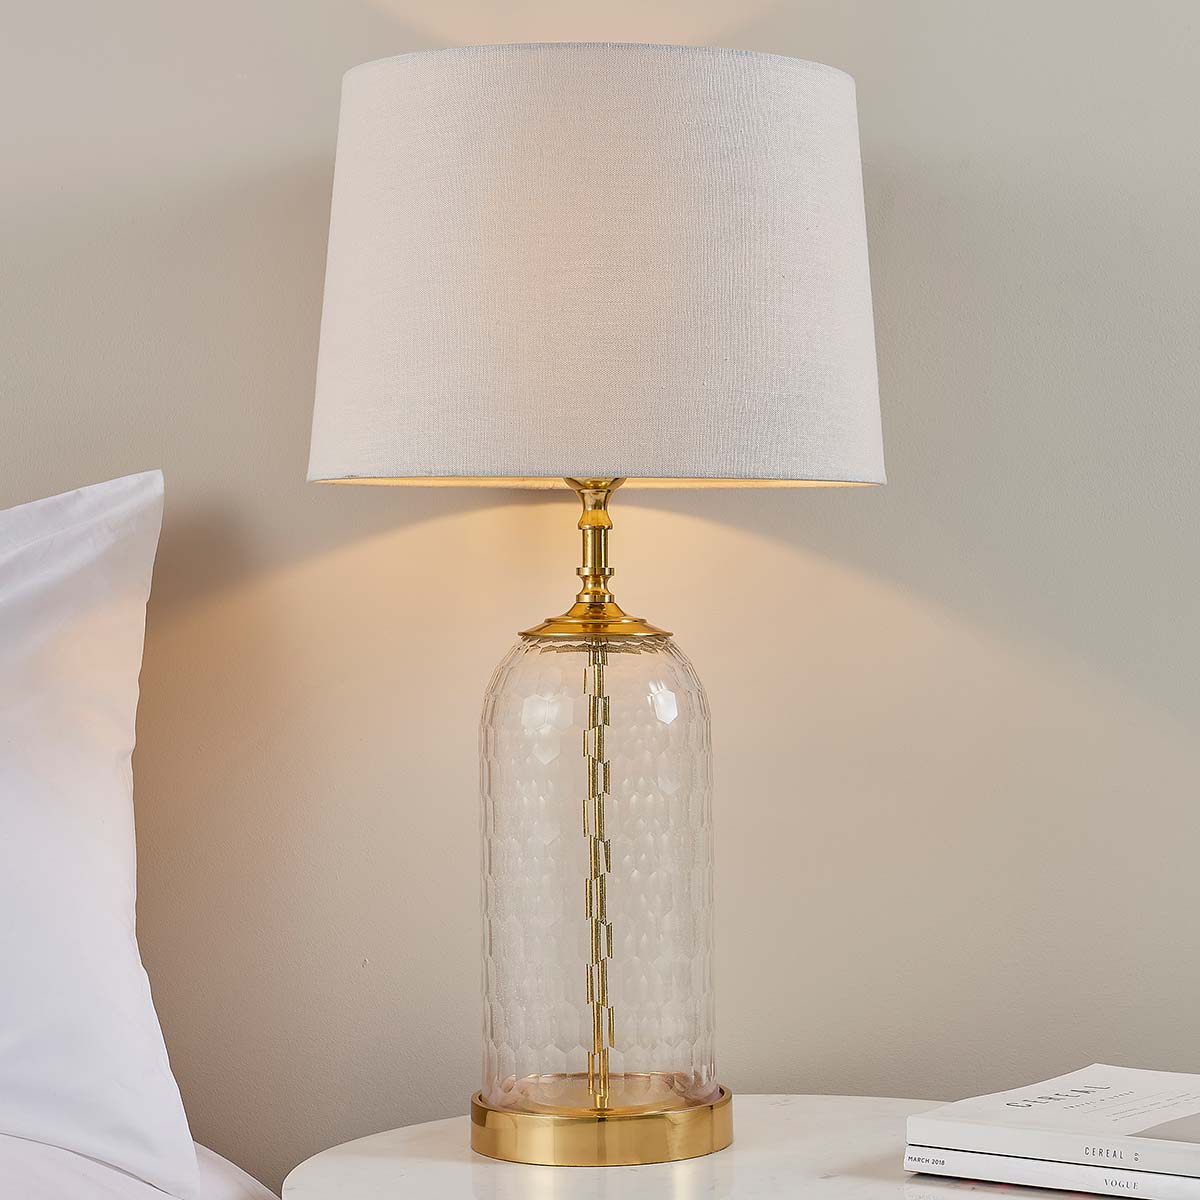 Wistow Cut Glass Table Lamp Solid Brass Natural Linen Shade